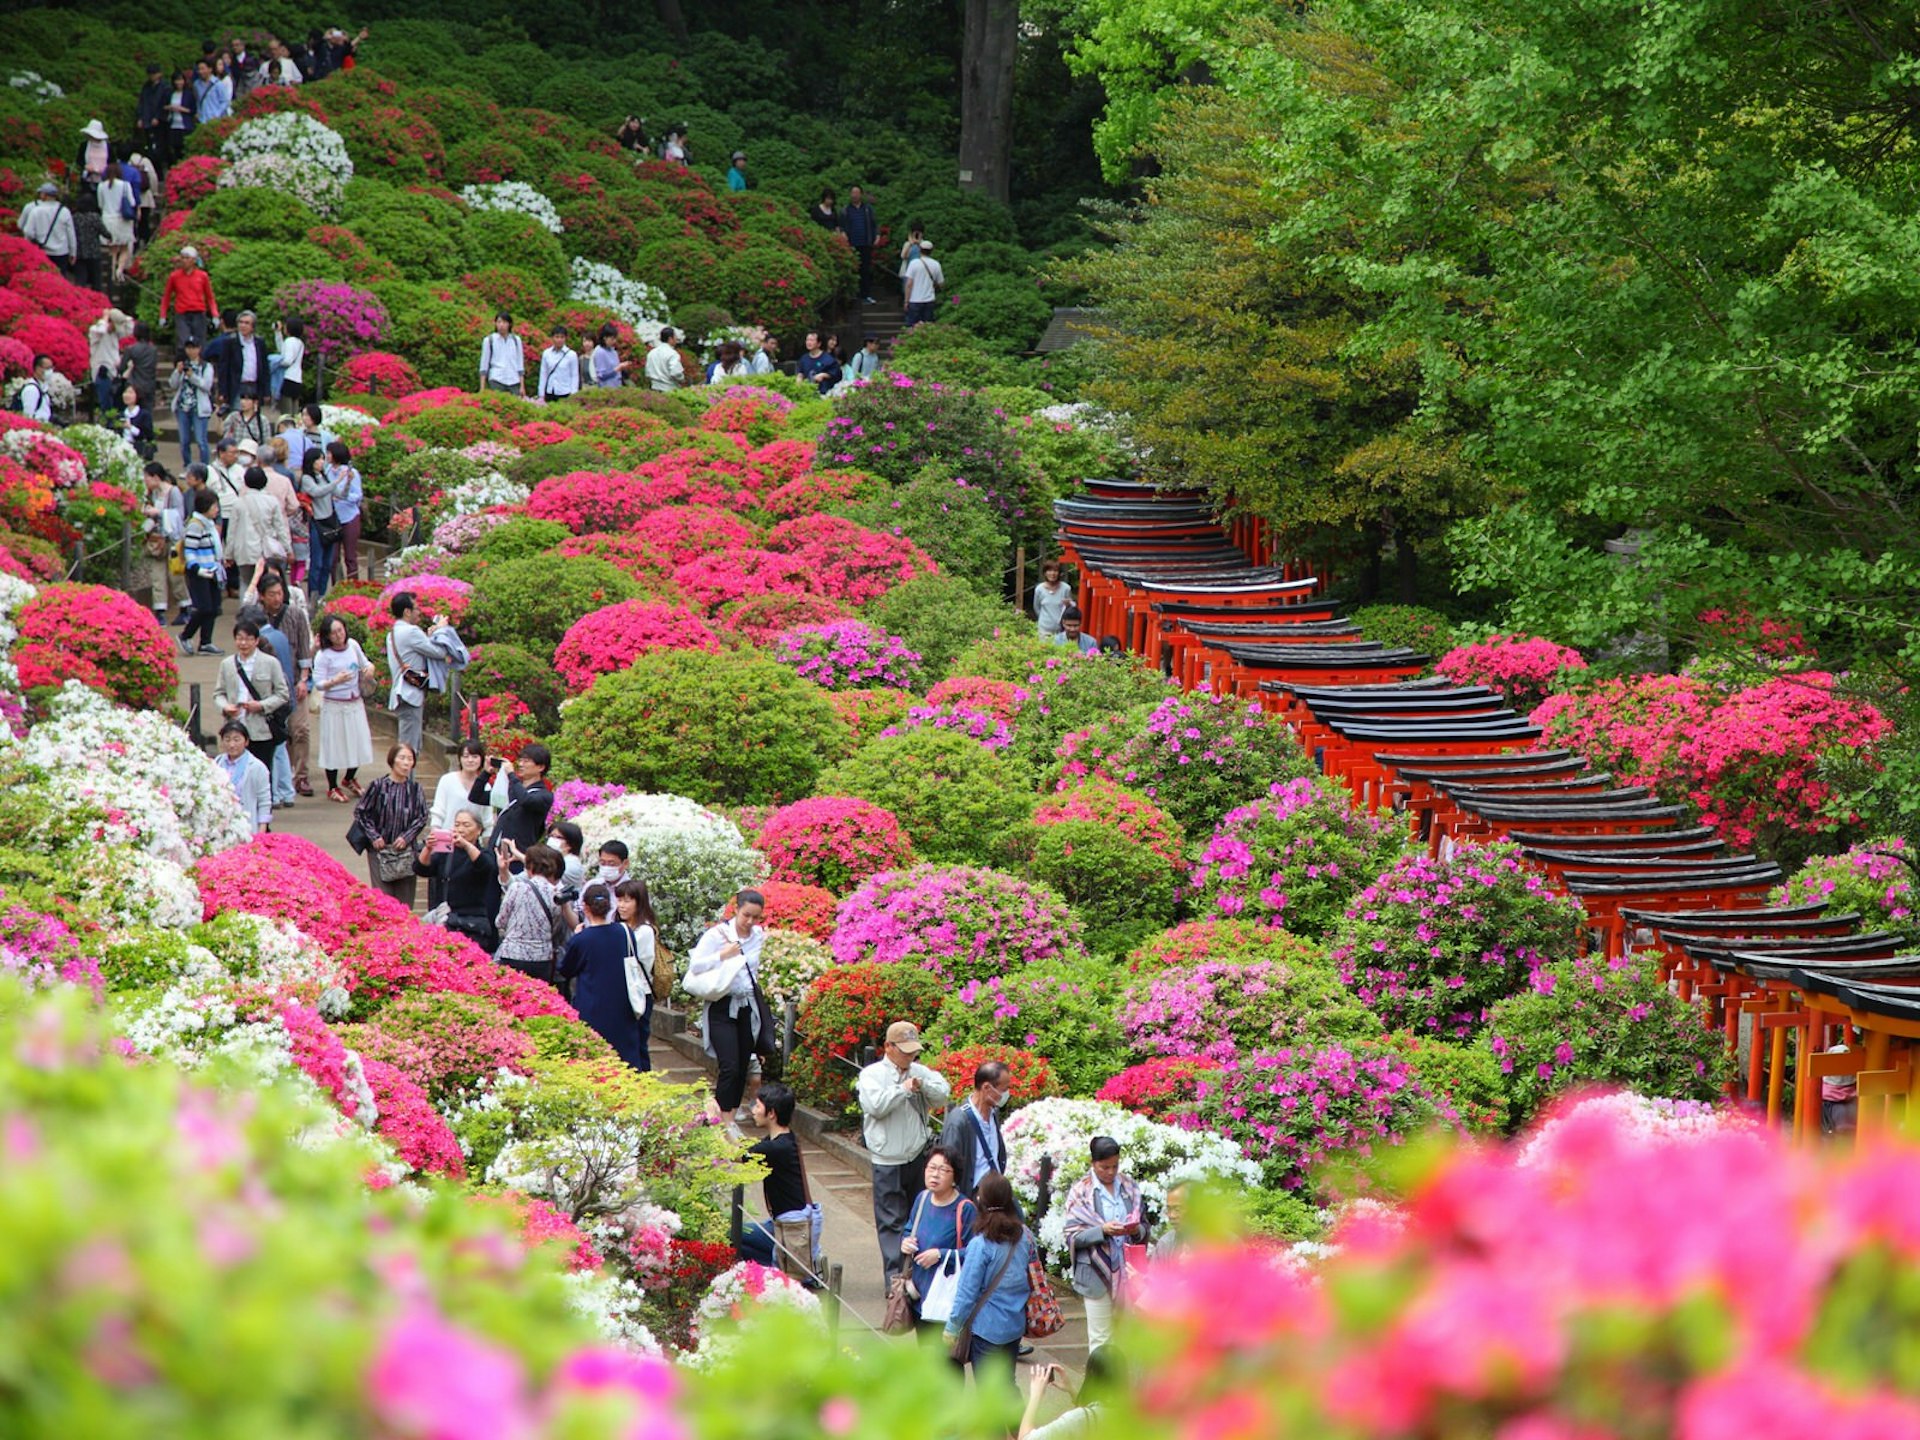 A line of people walk through the grounds of Nezu-jinja, which is covered in azalea bushes in bloom in spring